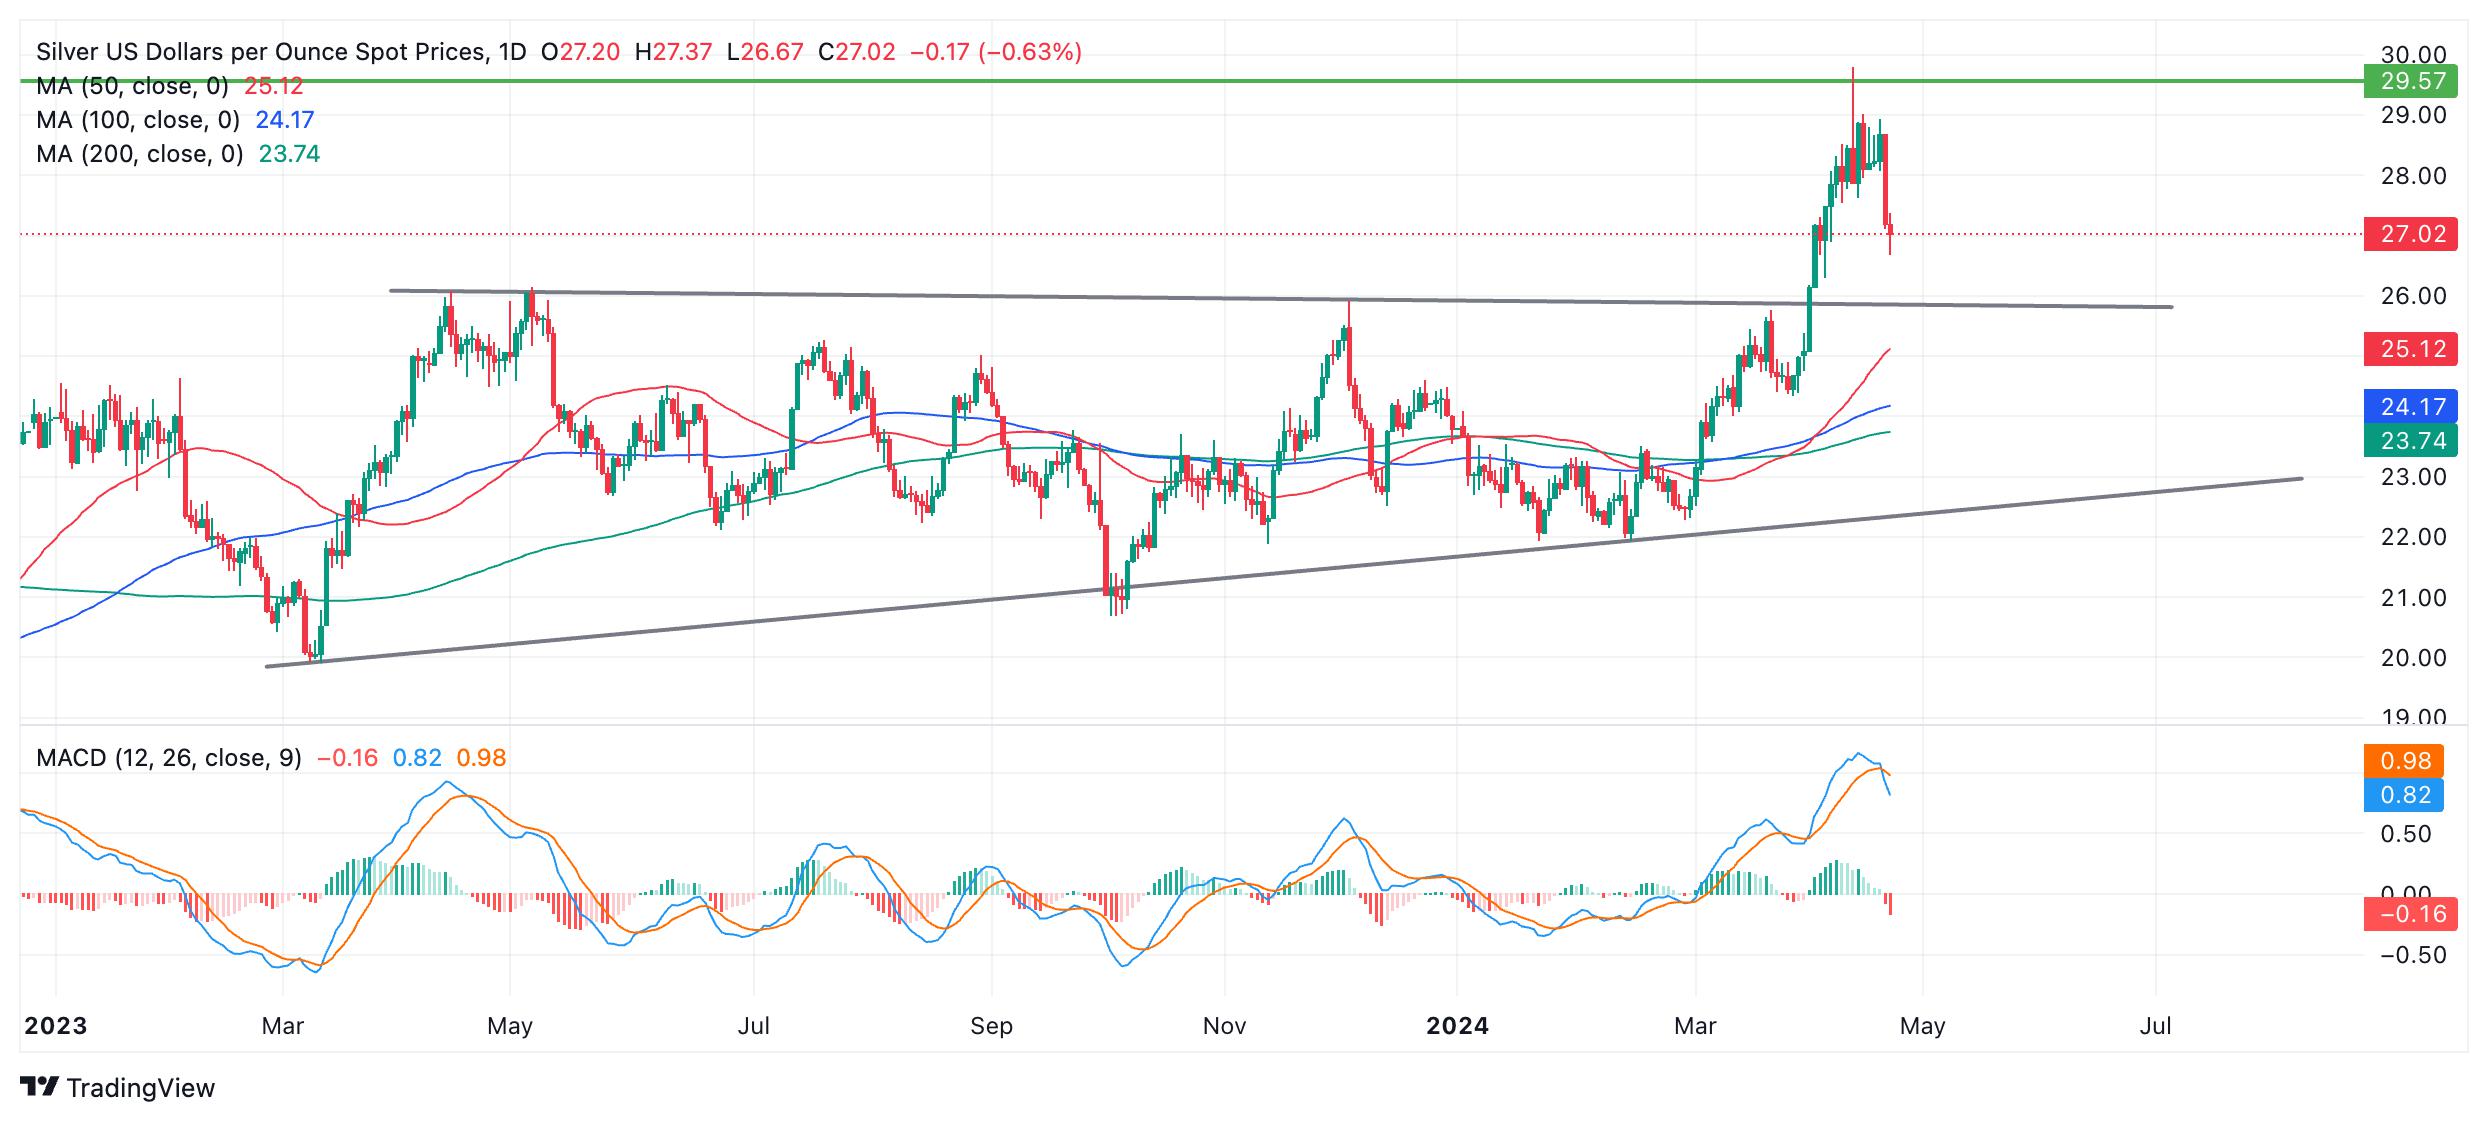 Silver Price Analysis: Silver price in steep sell-off after touching top of four-year range